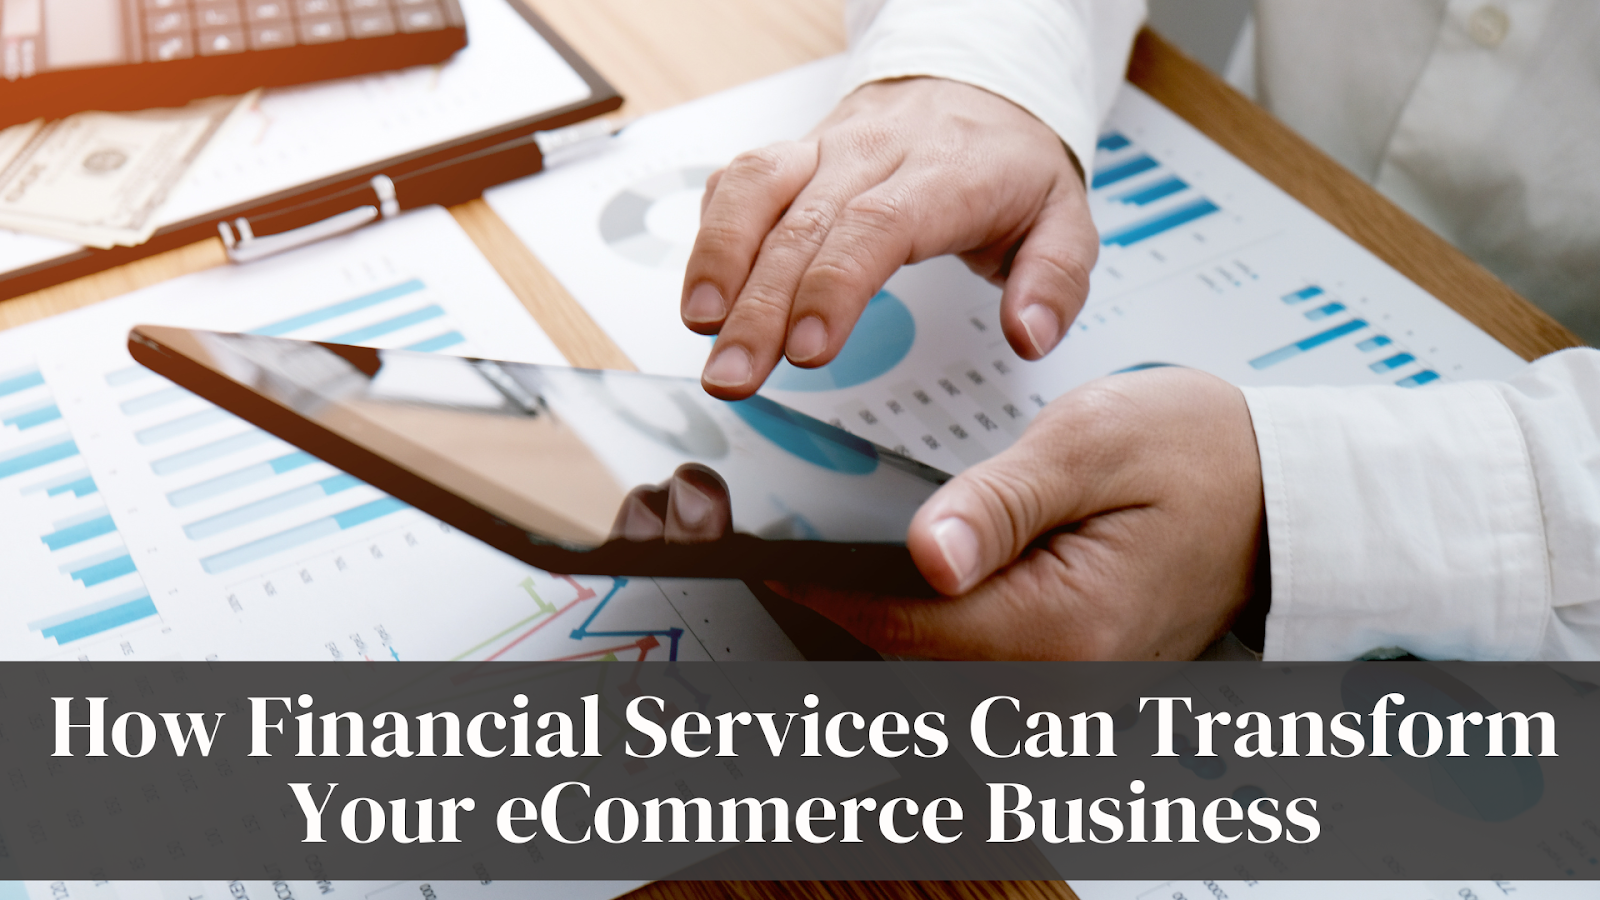 How Financial Services Can Transform Your eCommerce Business